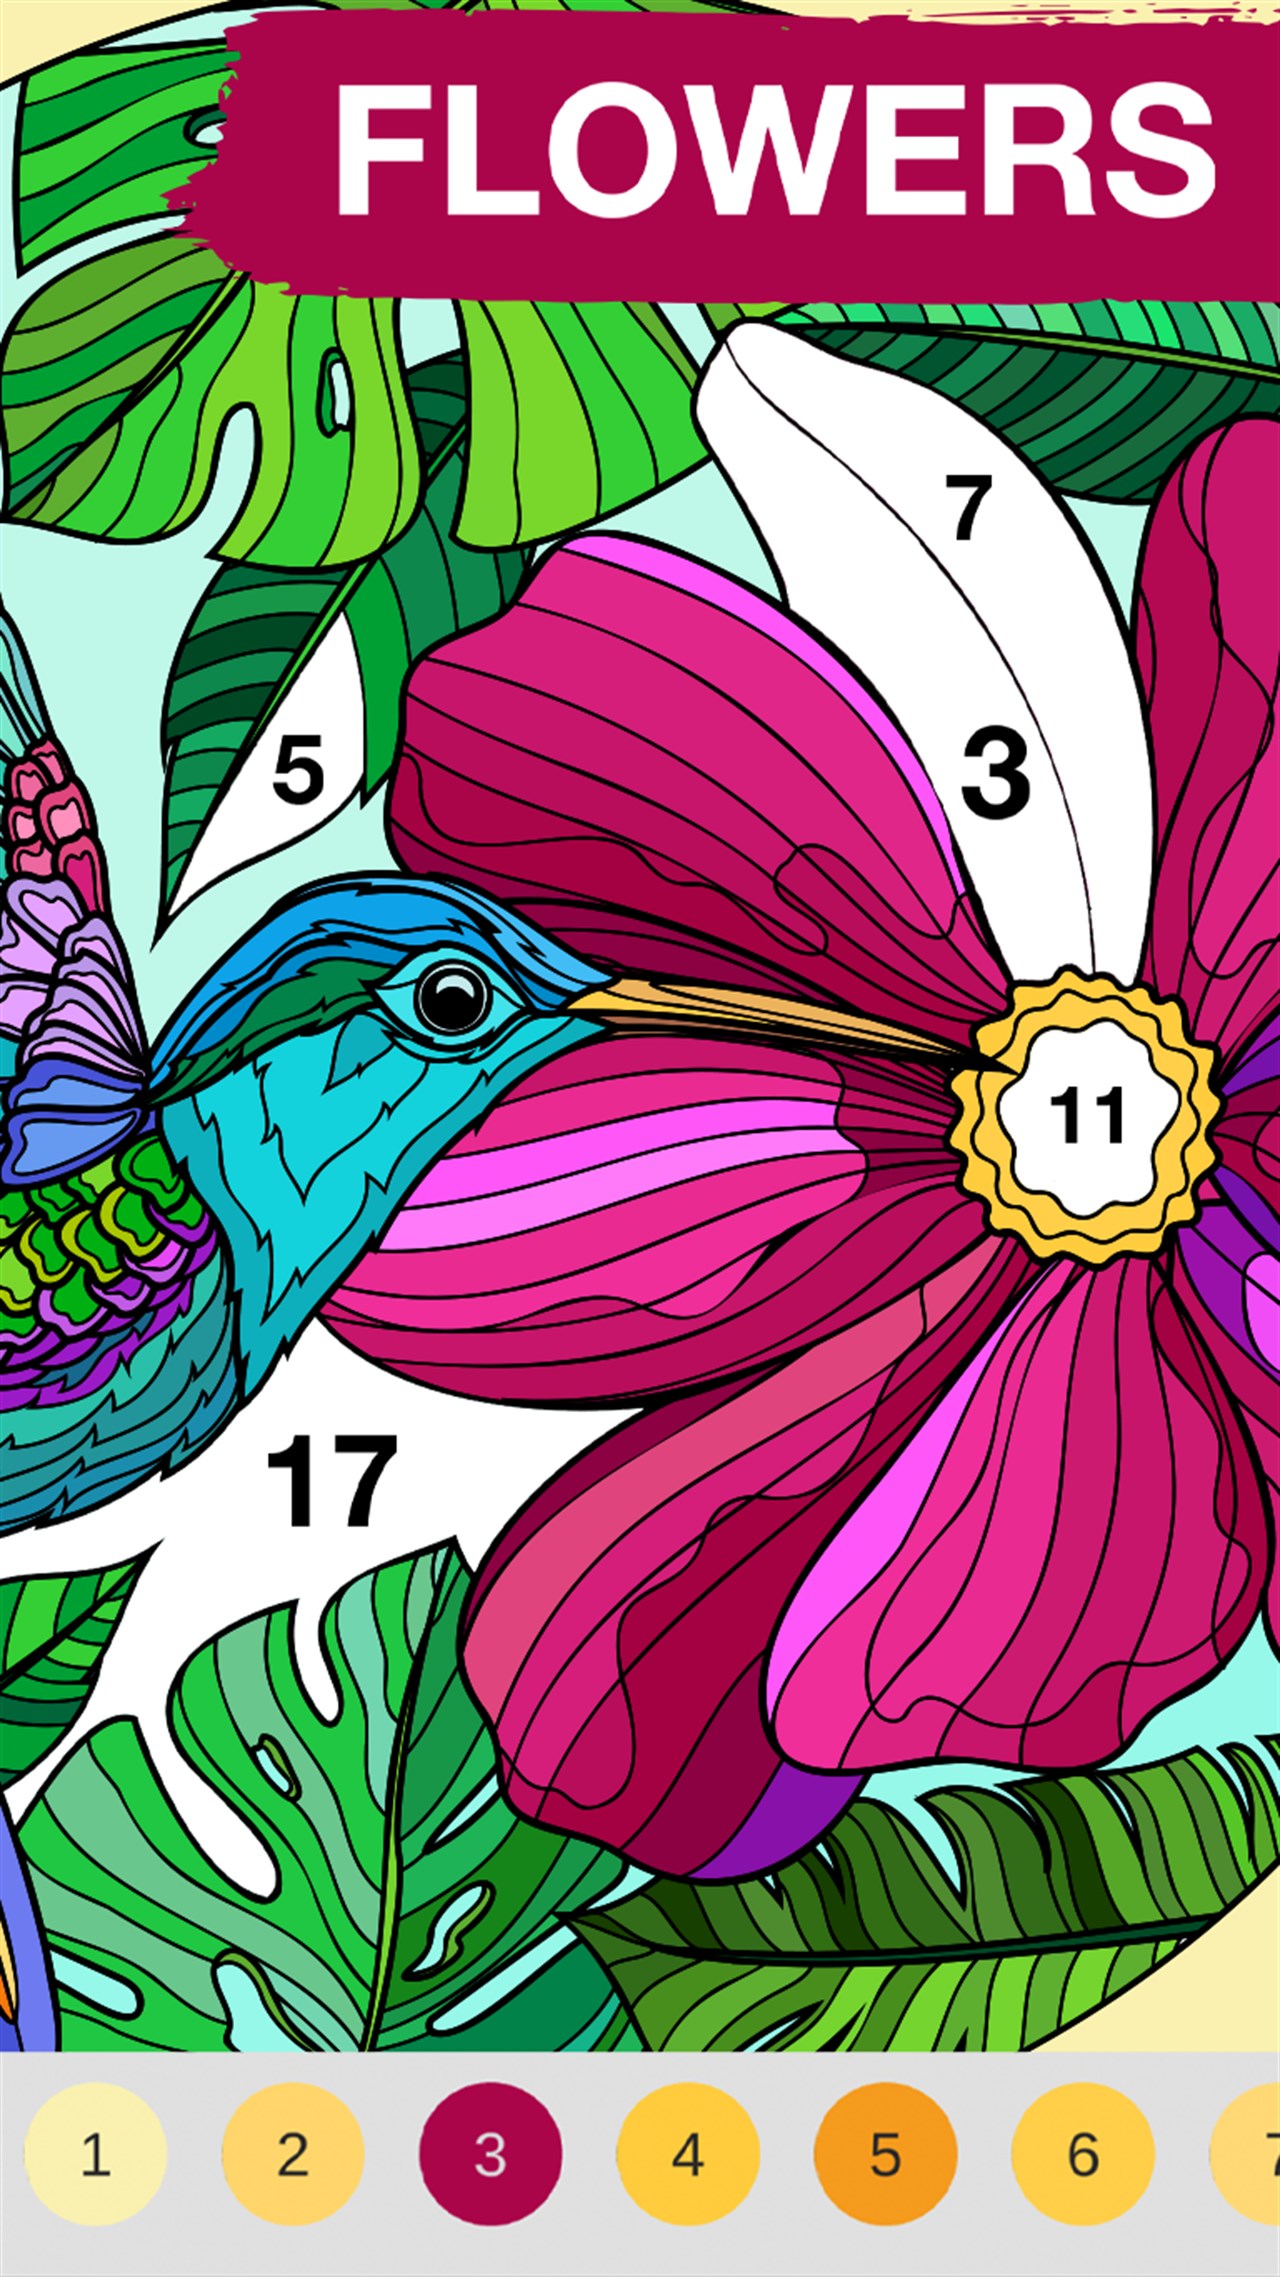 Mandalas Coloring Book - Coloring Pages to Relax - Apiau Microsoft